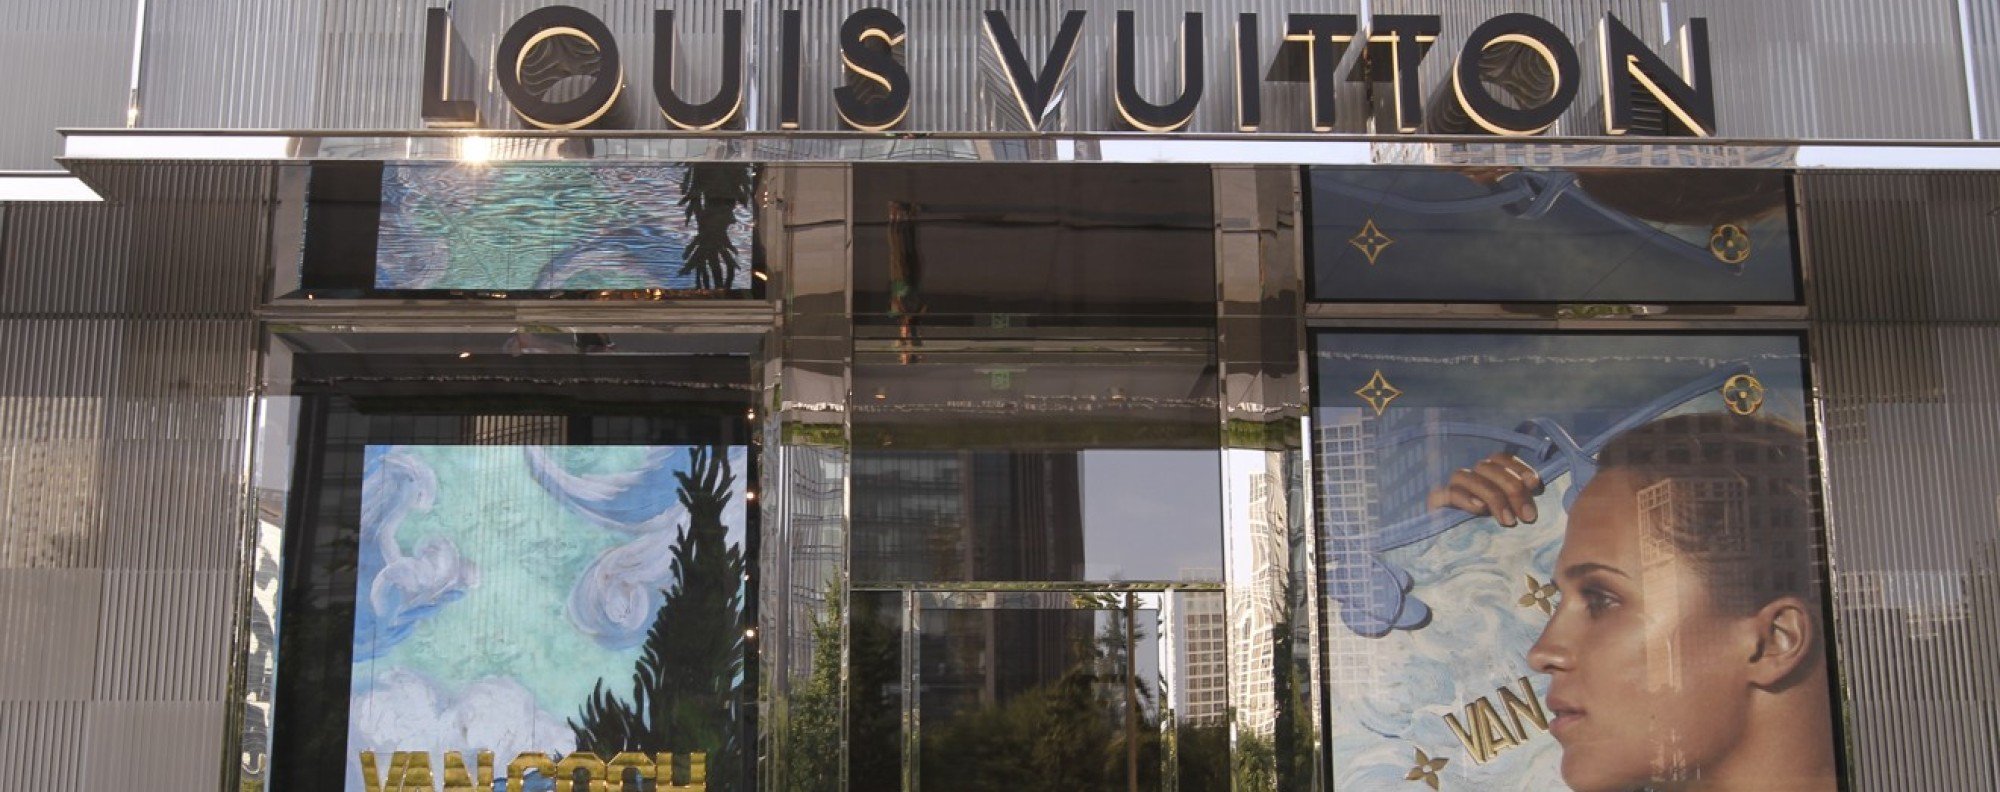 Vying for Vuitton: China's E-Commerce Rivals Seek Luxury Stranglehold